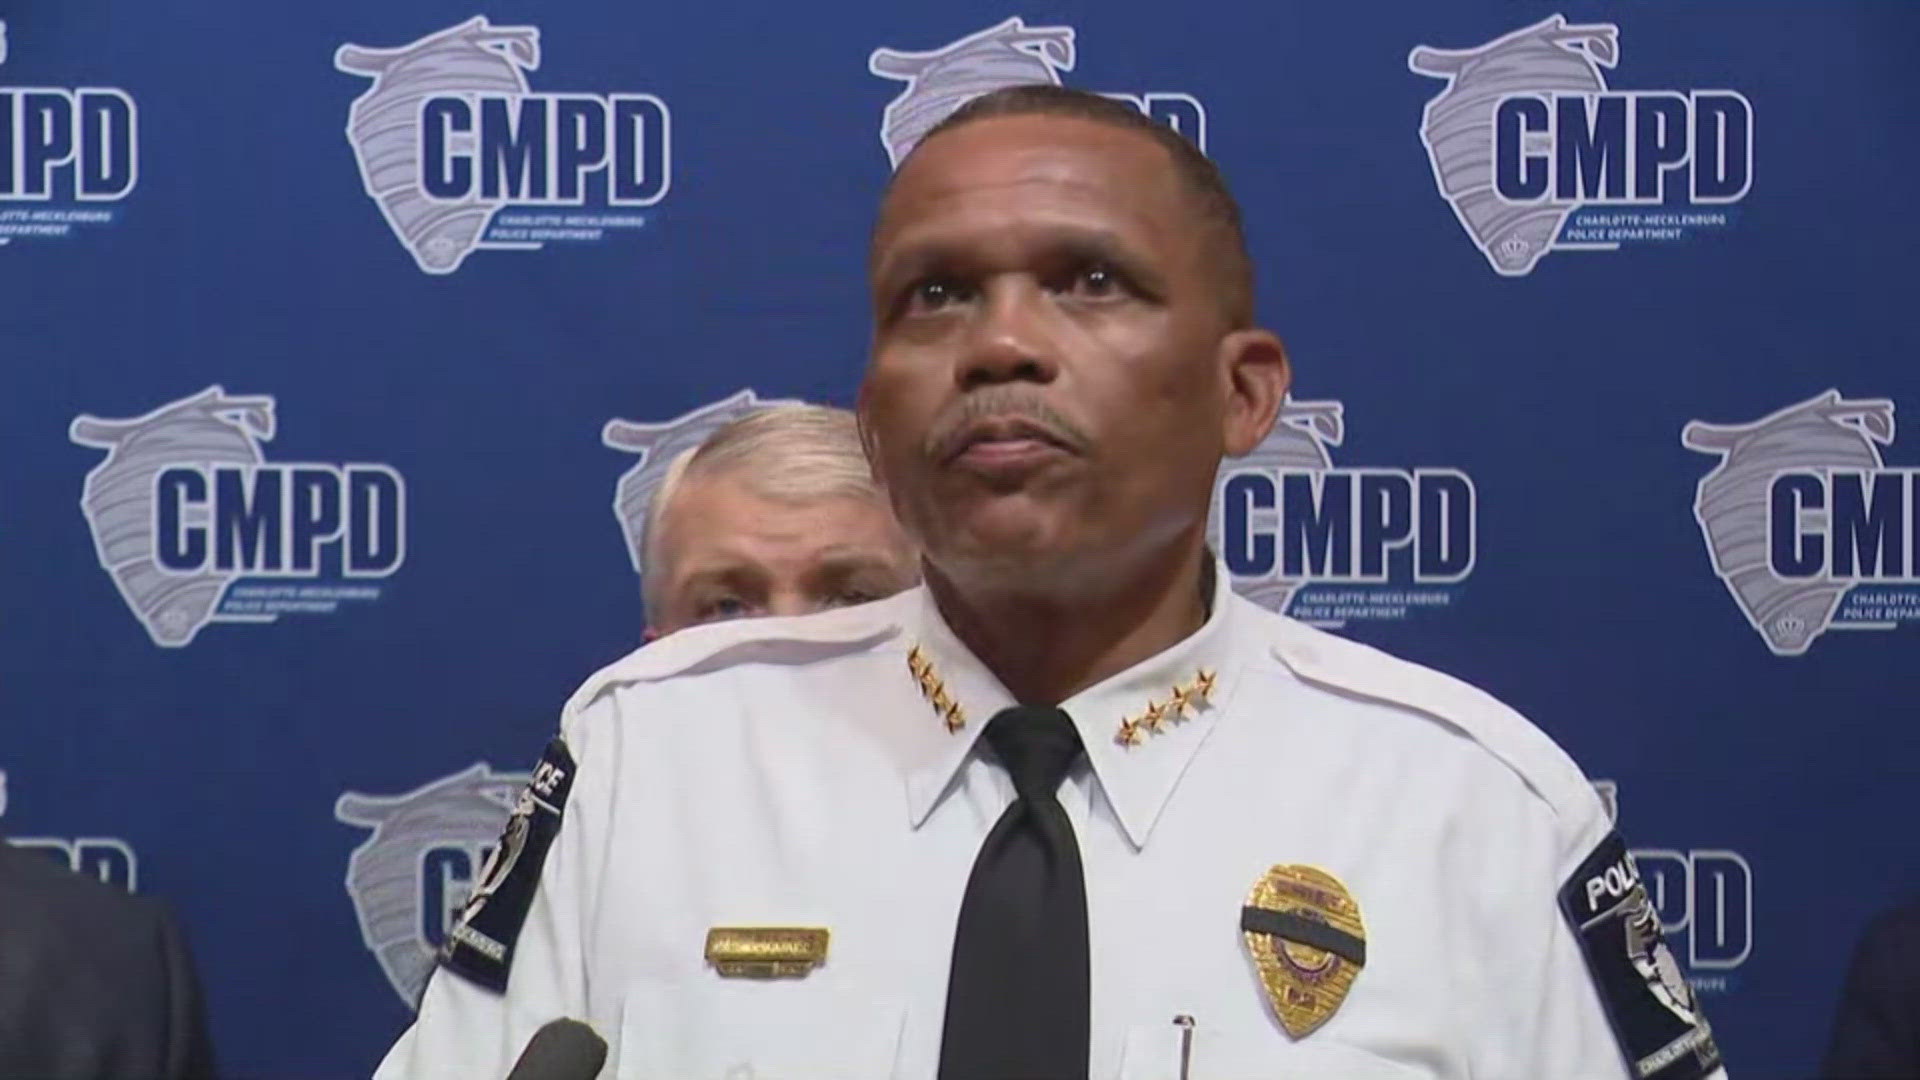 Charlotte-Mecklenburg Police Department Chief Johnny Jennings said he is overwhelmed by the support of the law enforcement community after four officers were killed.